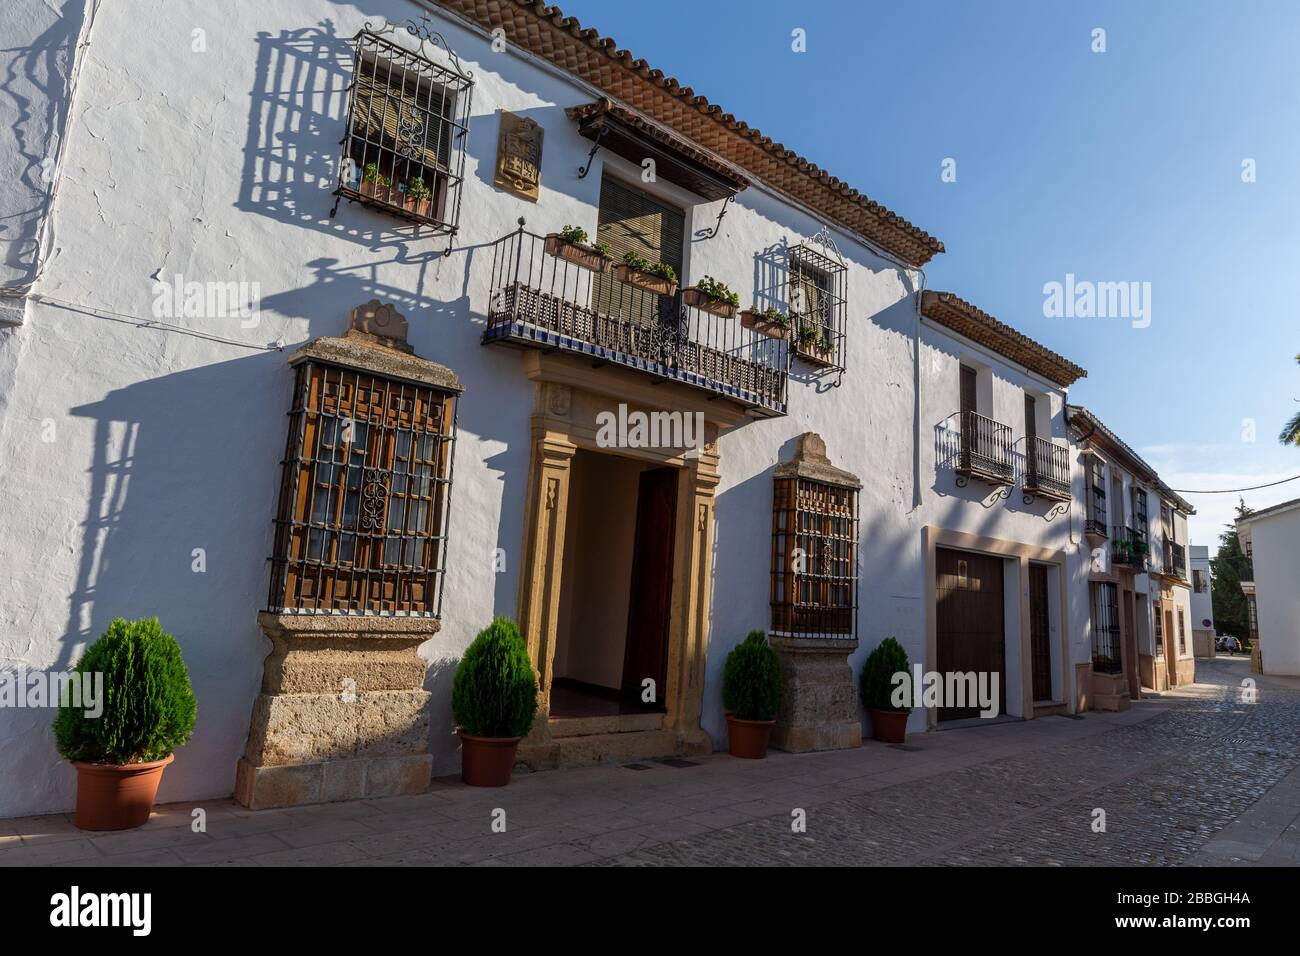 Houses in the old town of Ronda, one of the famous white towns of Andalusia, Spain. Stock Photo